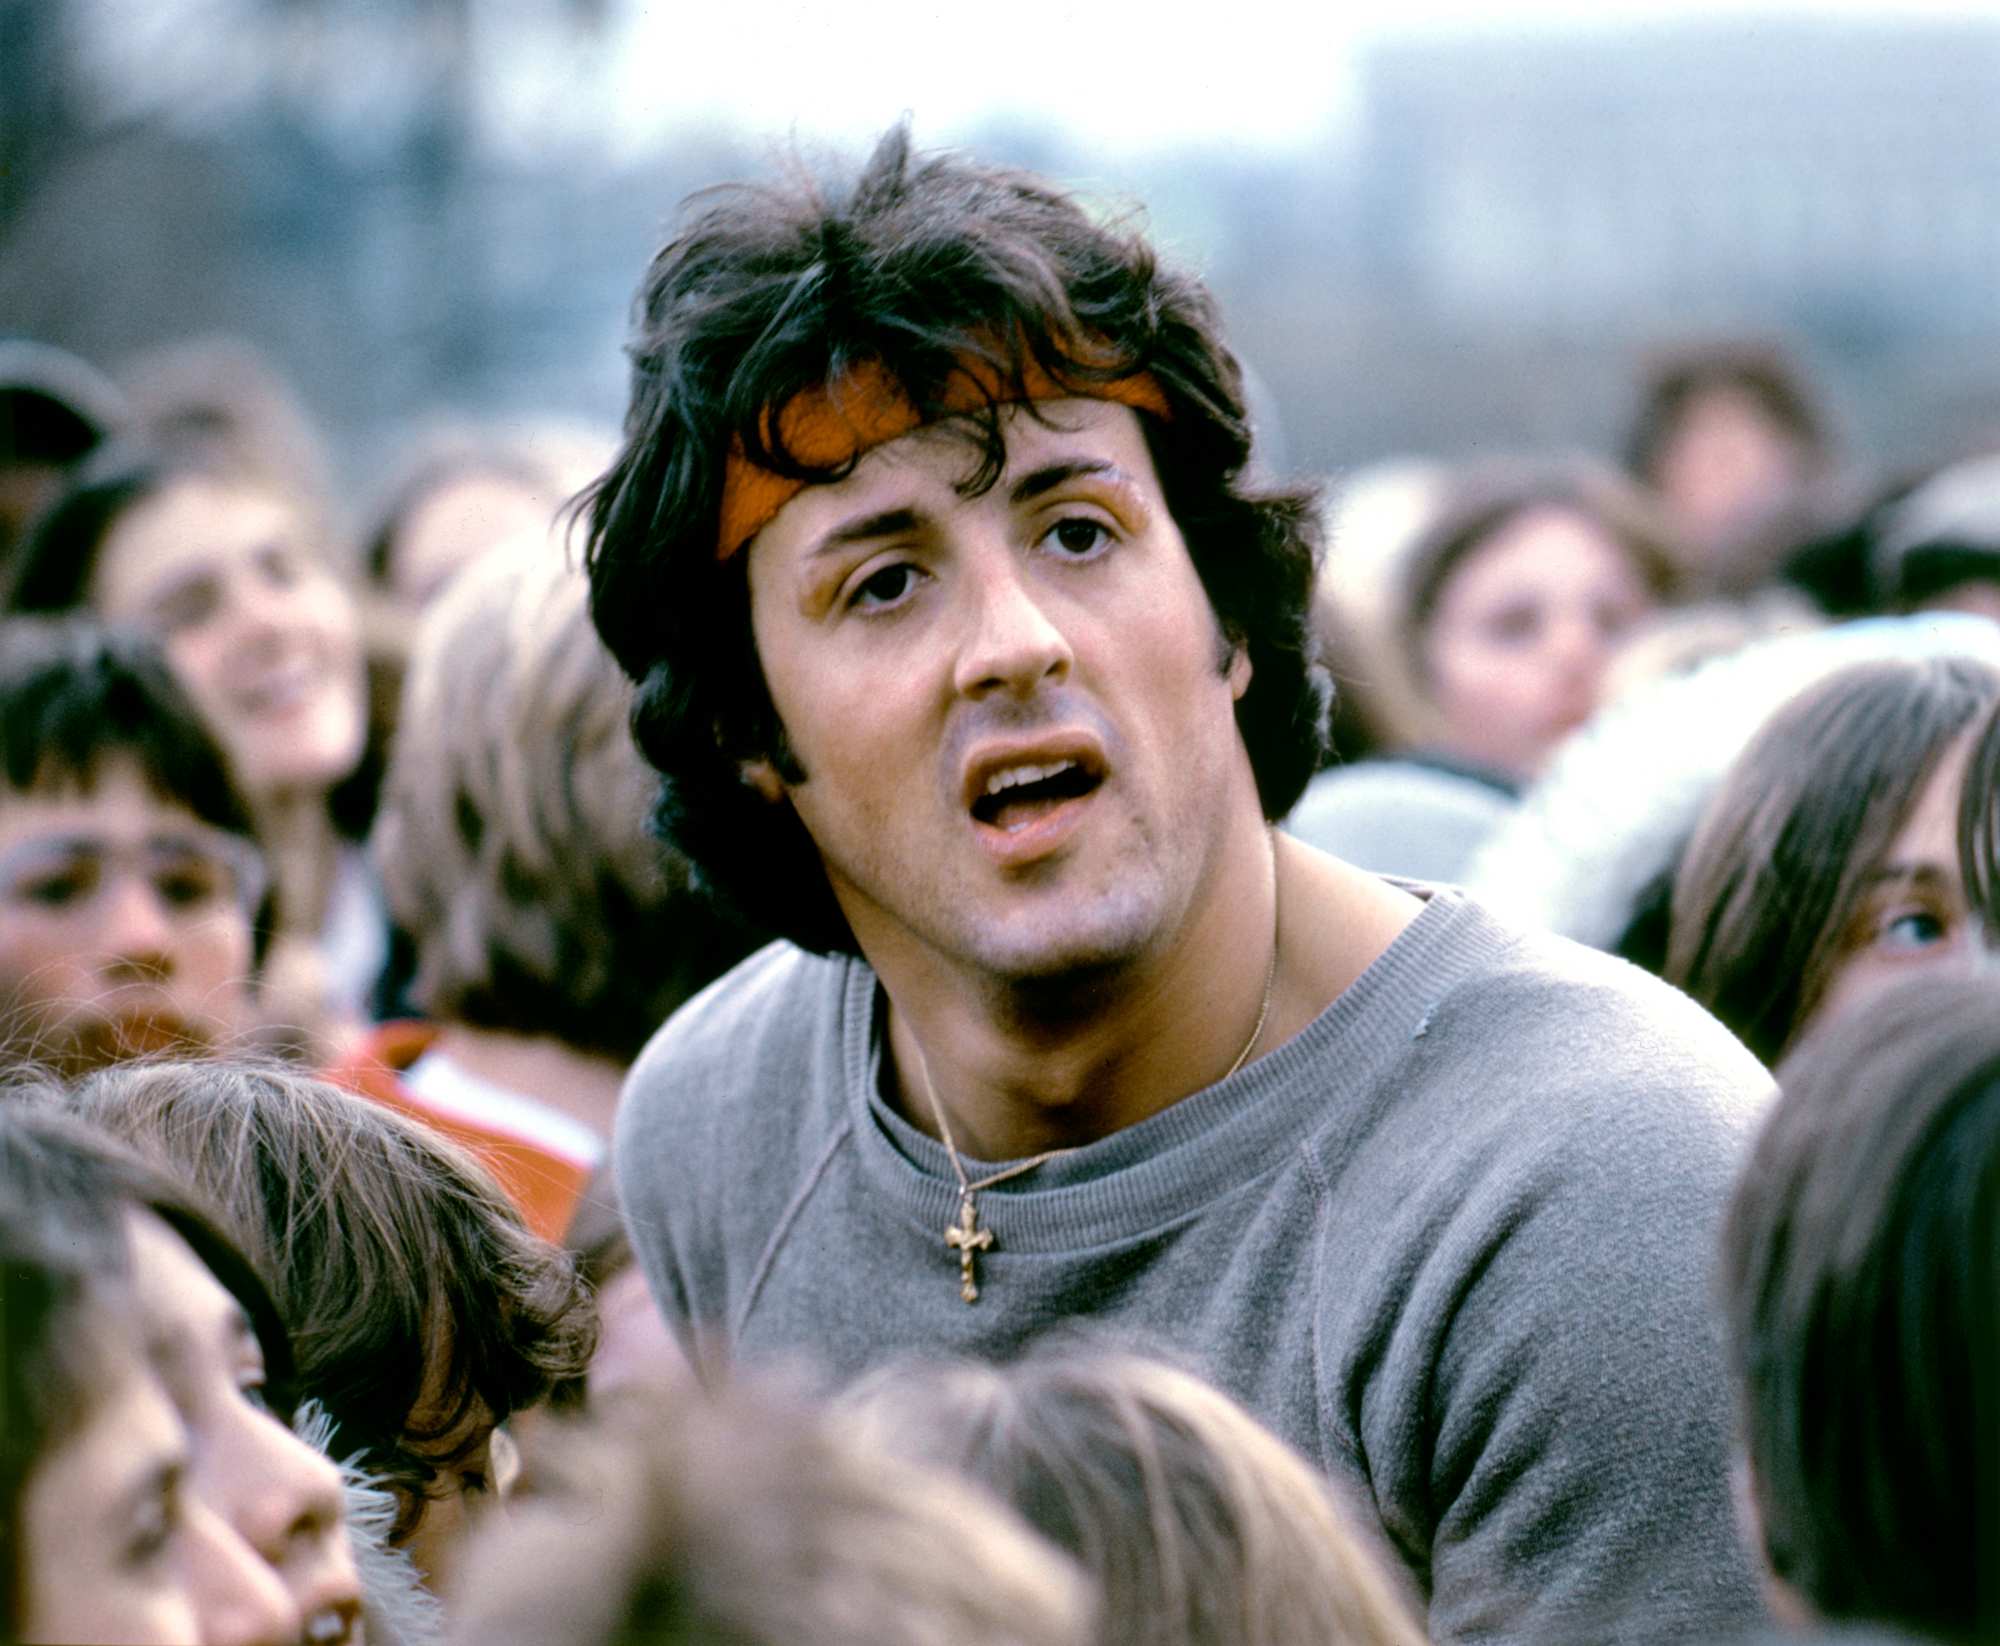 'Rocky II' Sylvester Stallone as Rocky with his mouth hanging open, wearing a sweatband. He's standing in a crowd of people.